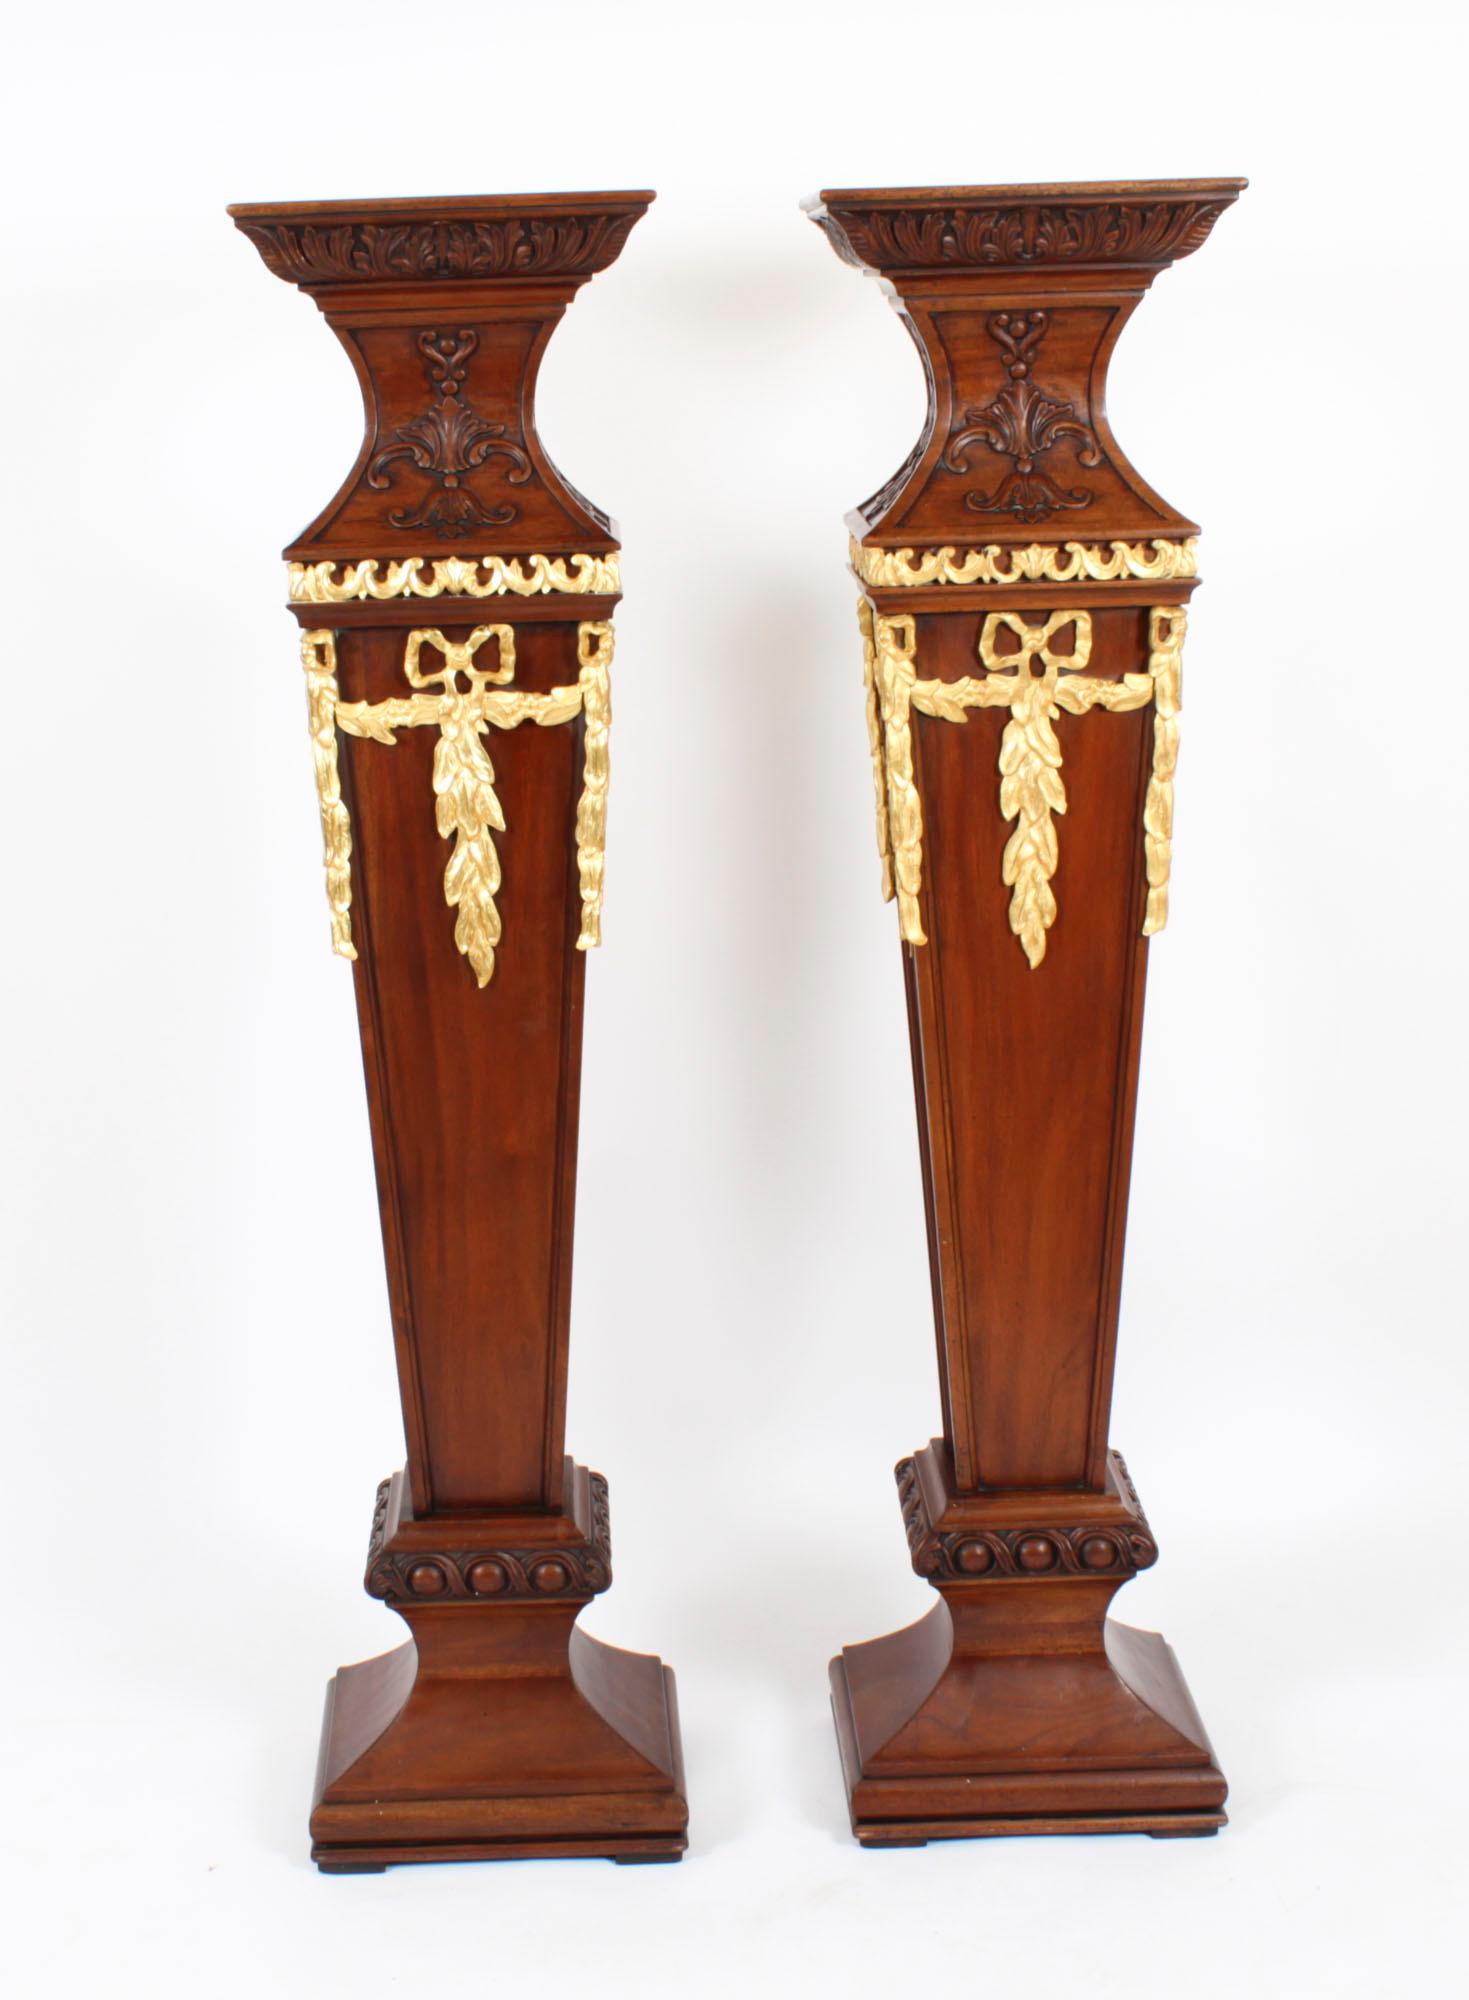 Antique Pair of Edwardian Mahogany Pedestals Torchere Stands Early 20th Century For Sale 10